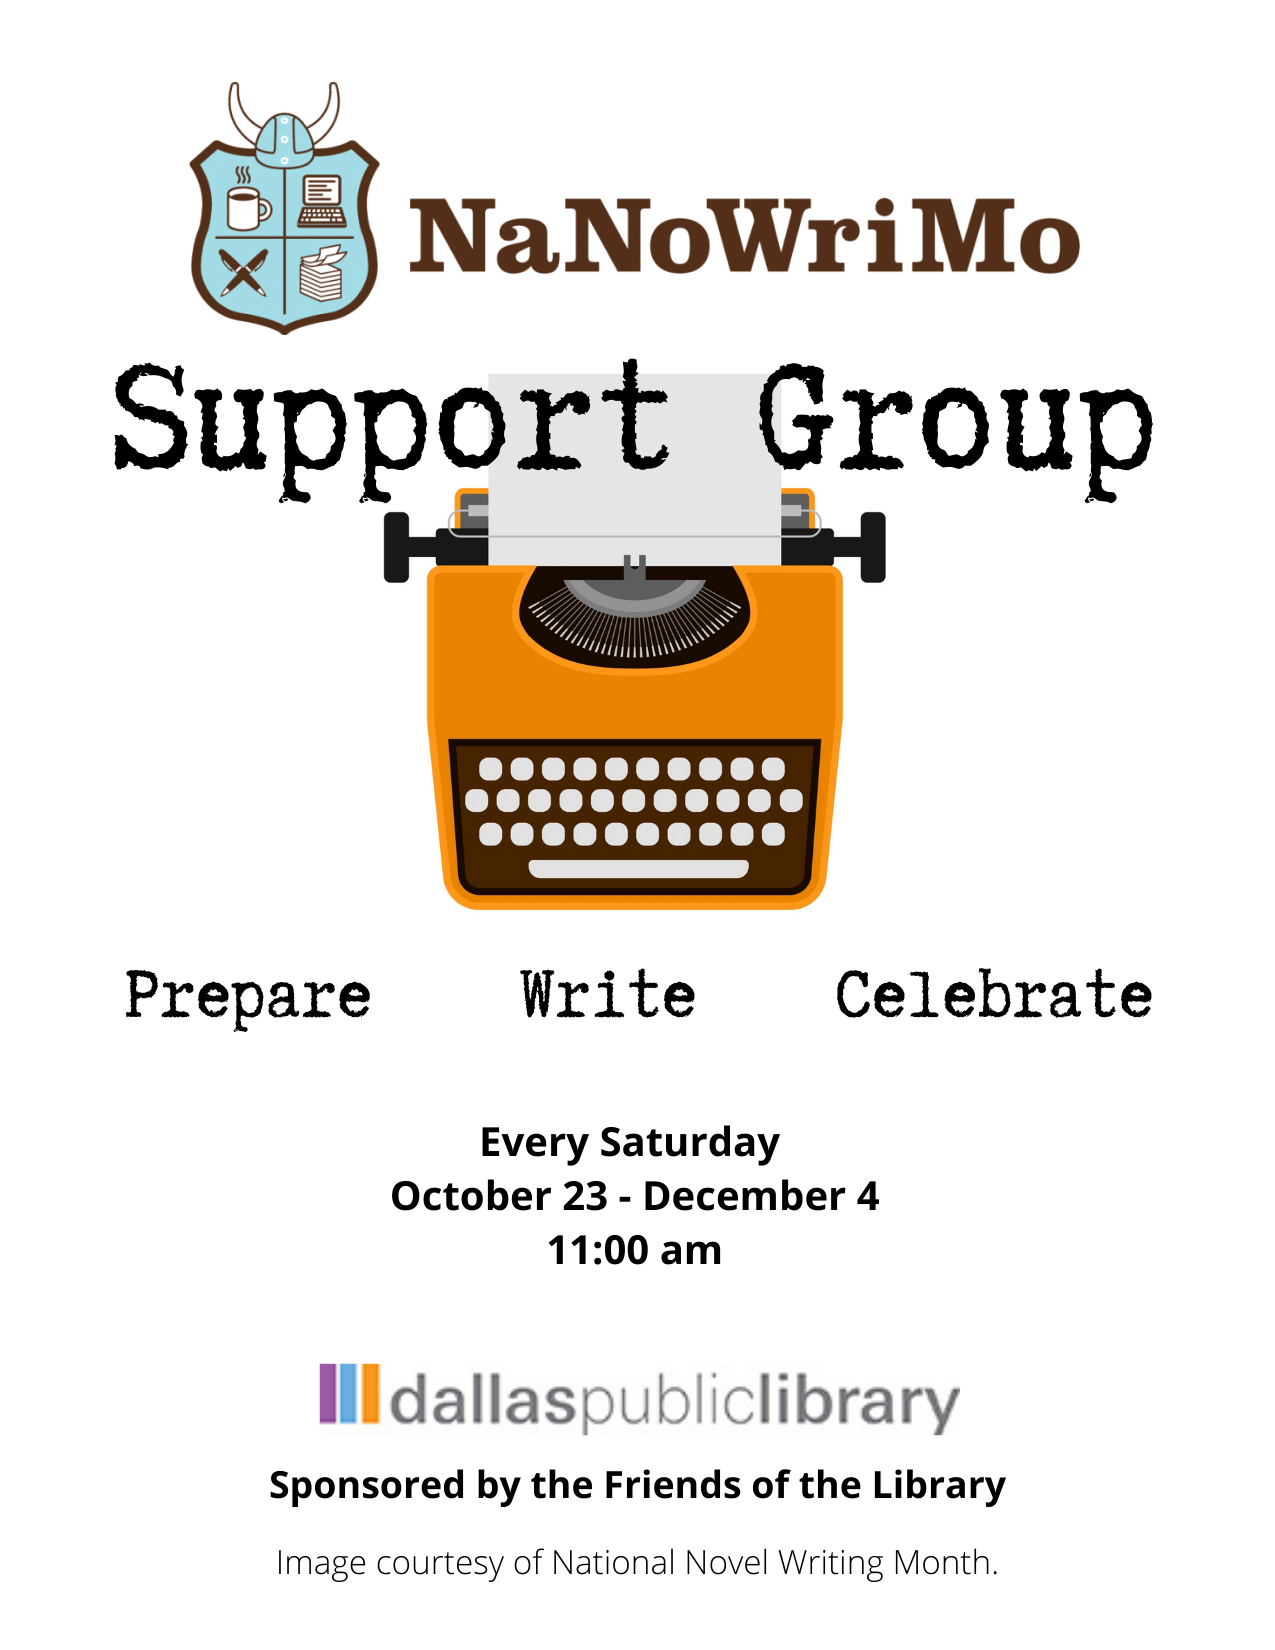 NaNoWriMo Support Group flyer